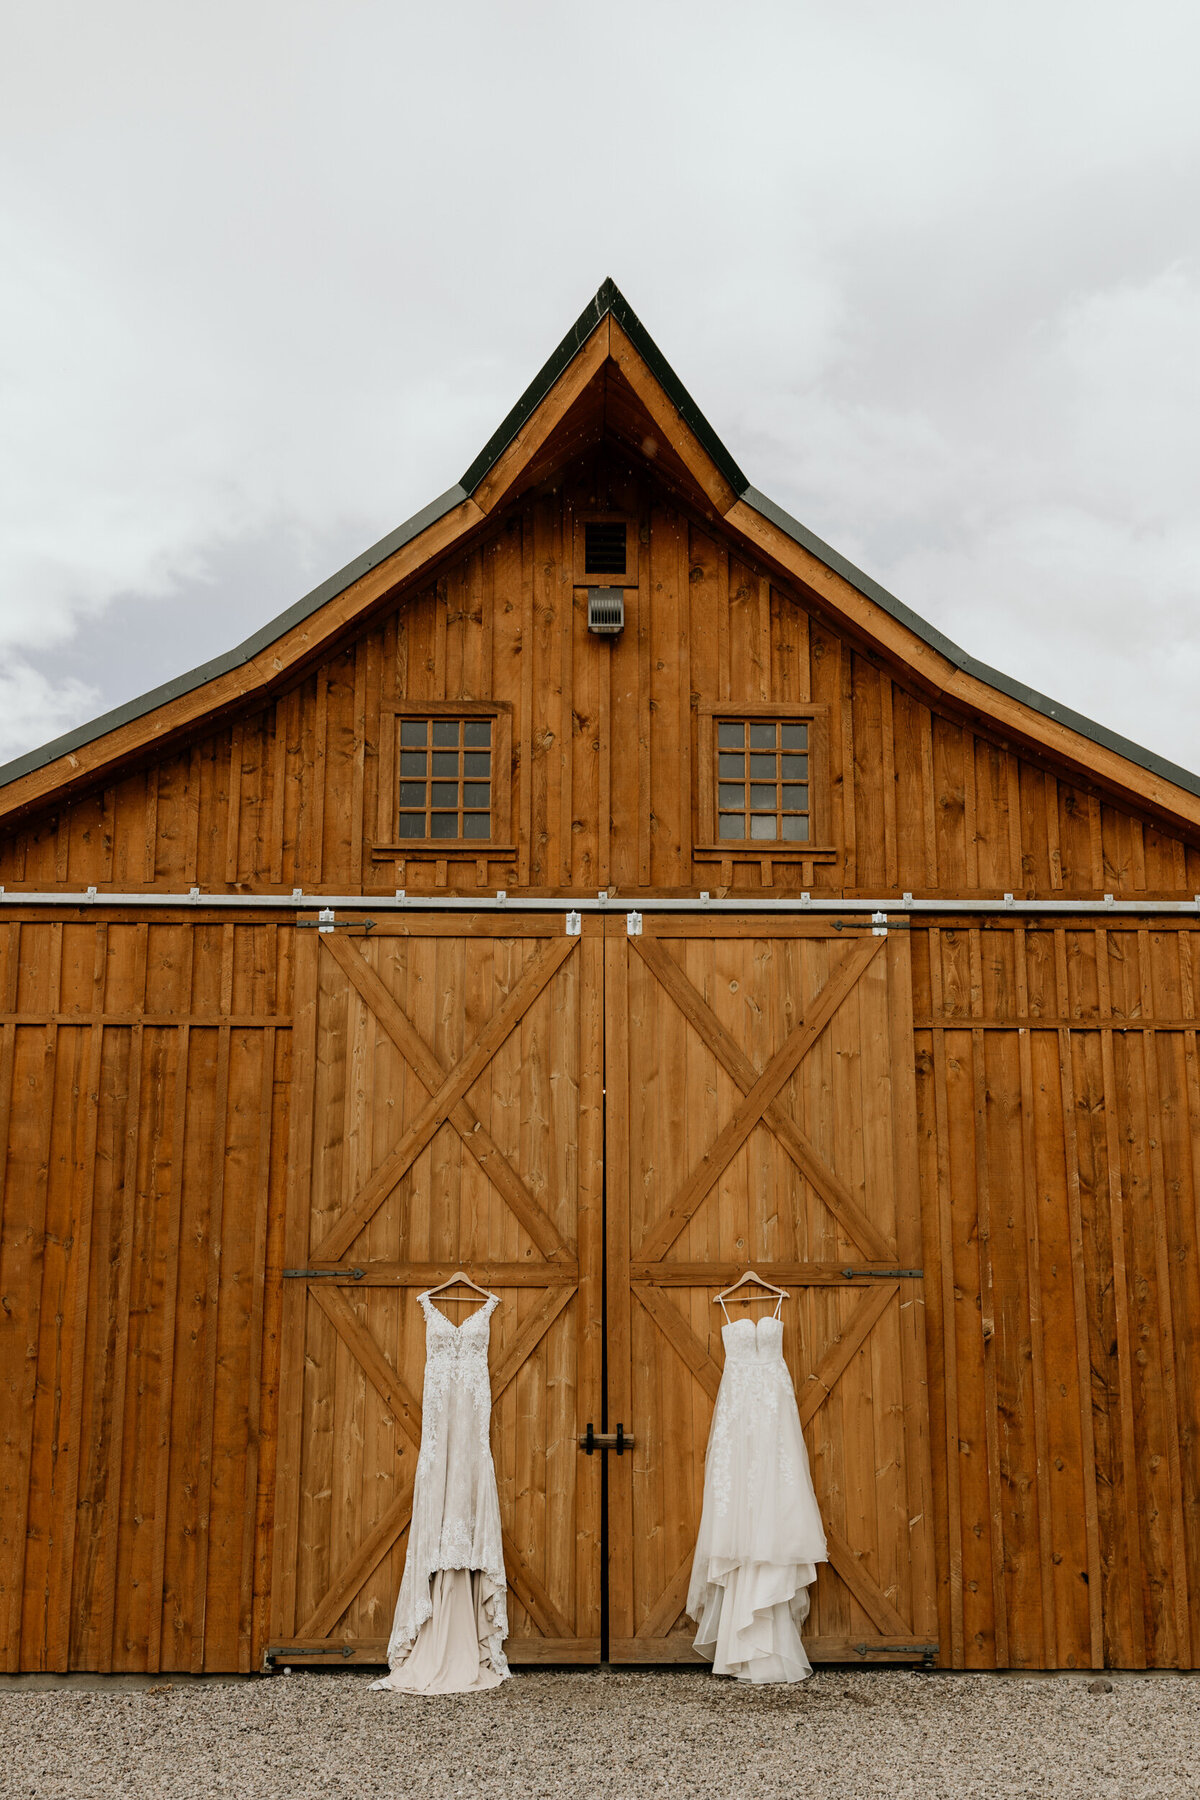 two wedding dresses hanging on a wooden barn